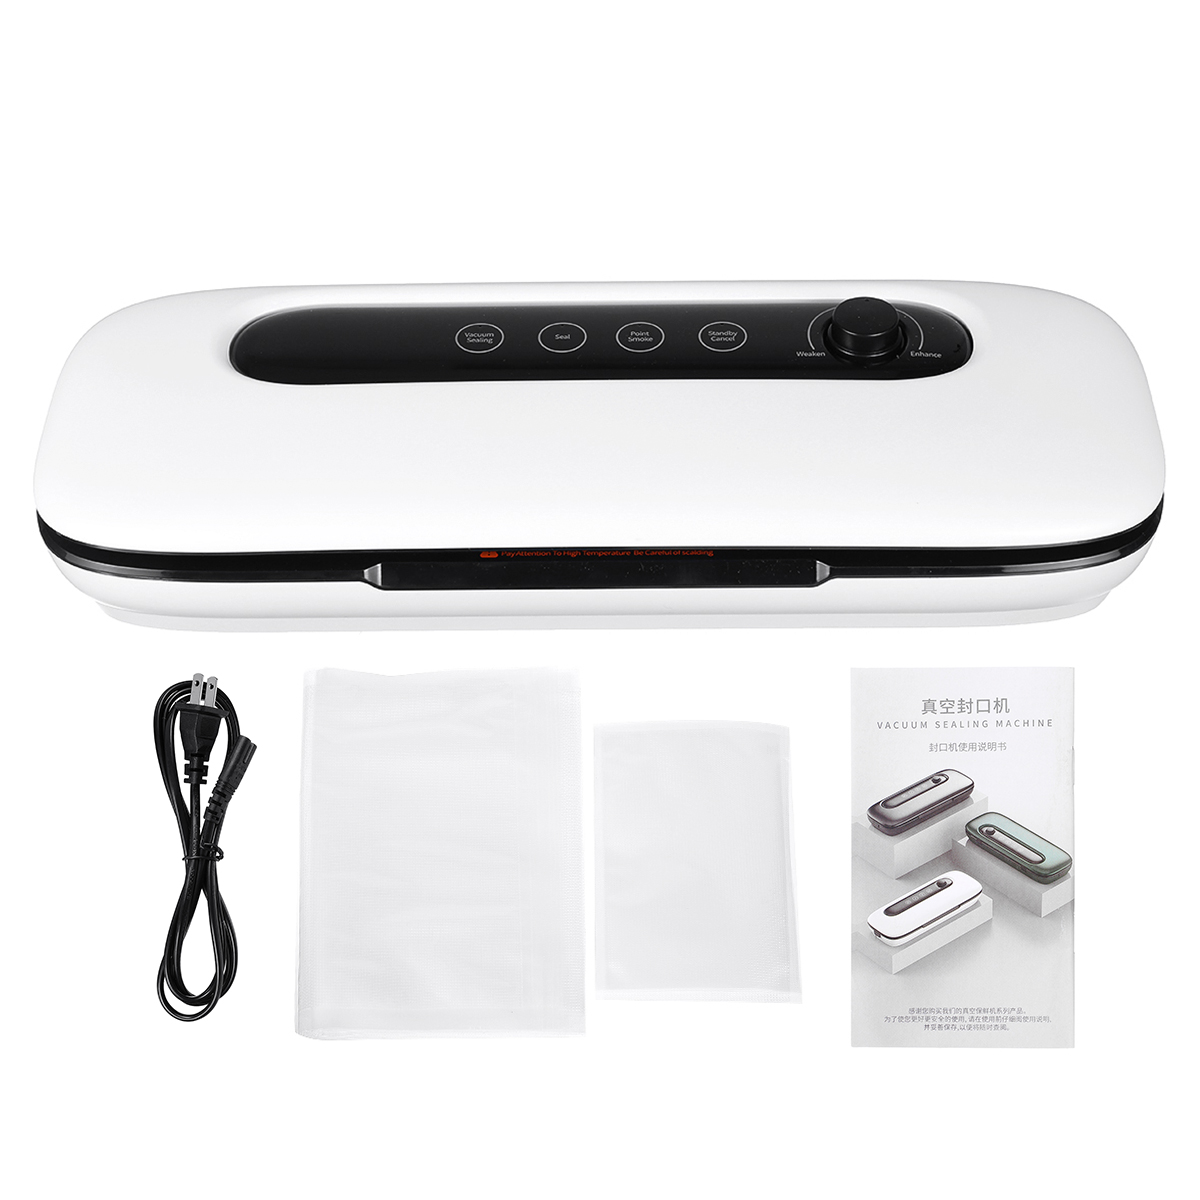 Vacuum-Sealer-Machine-Full-Automatic-Food-Sealer-Air-Sealing-System-for-Food-Storage-3-Functions-Ove-1928369-15